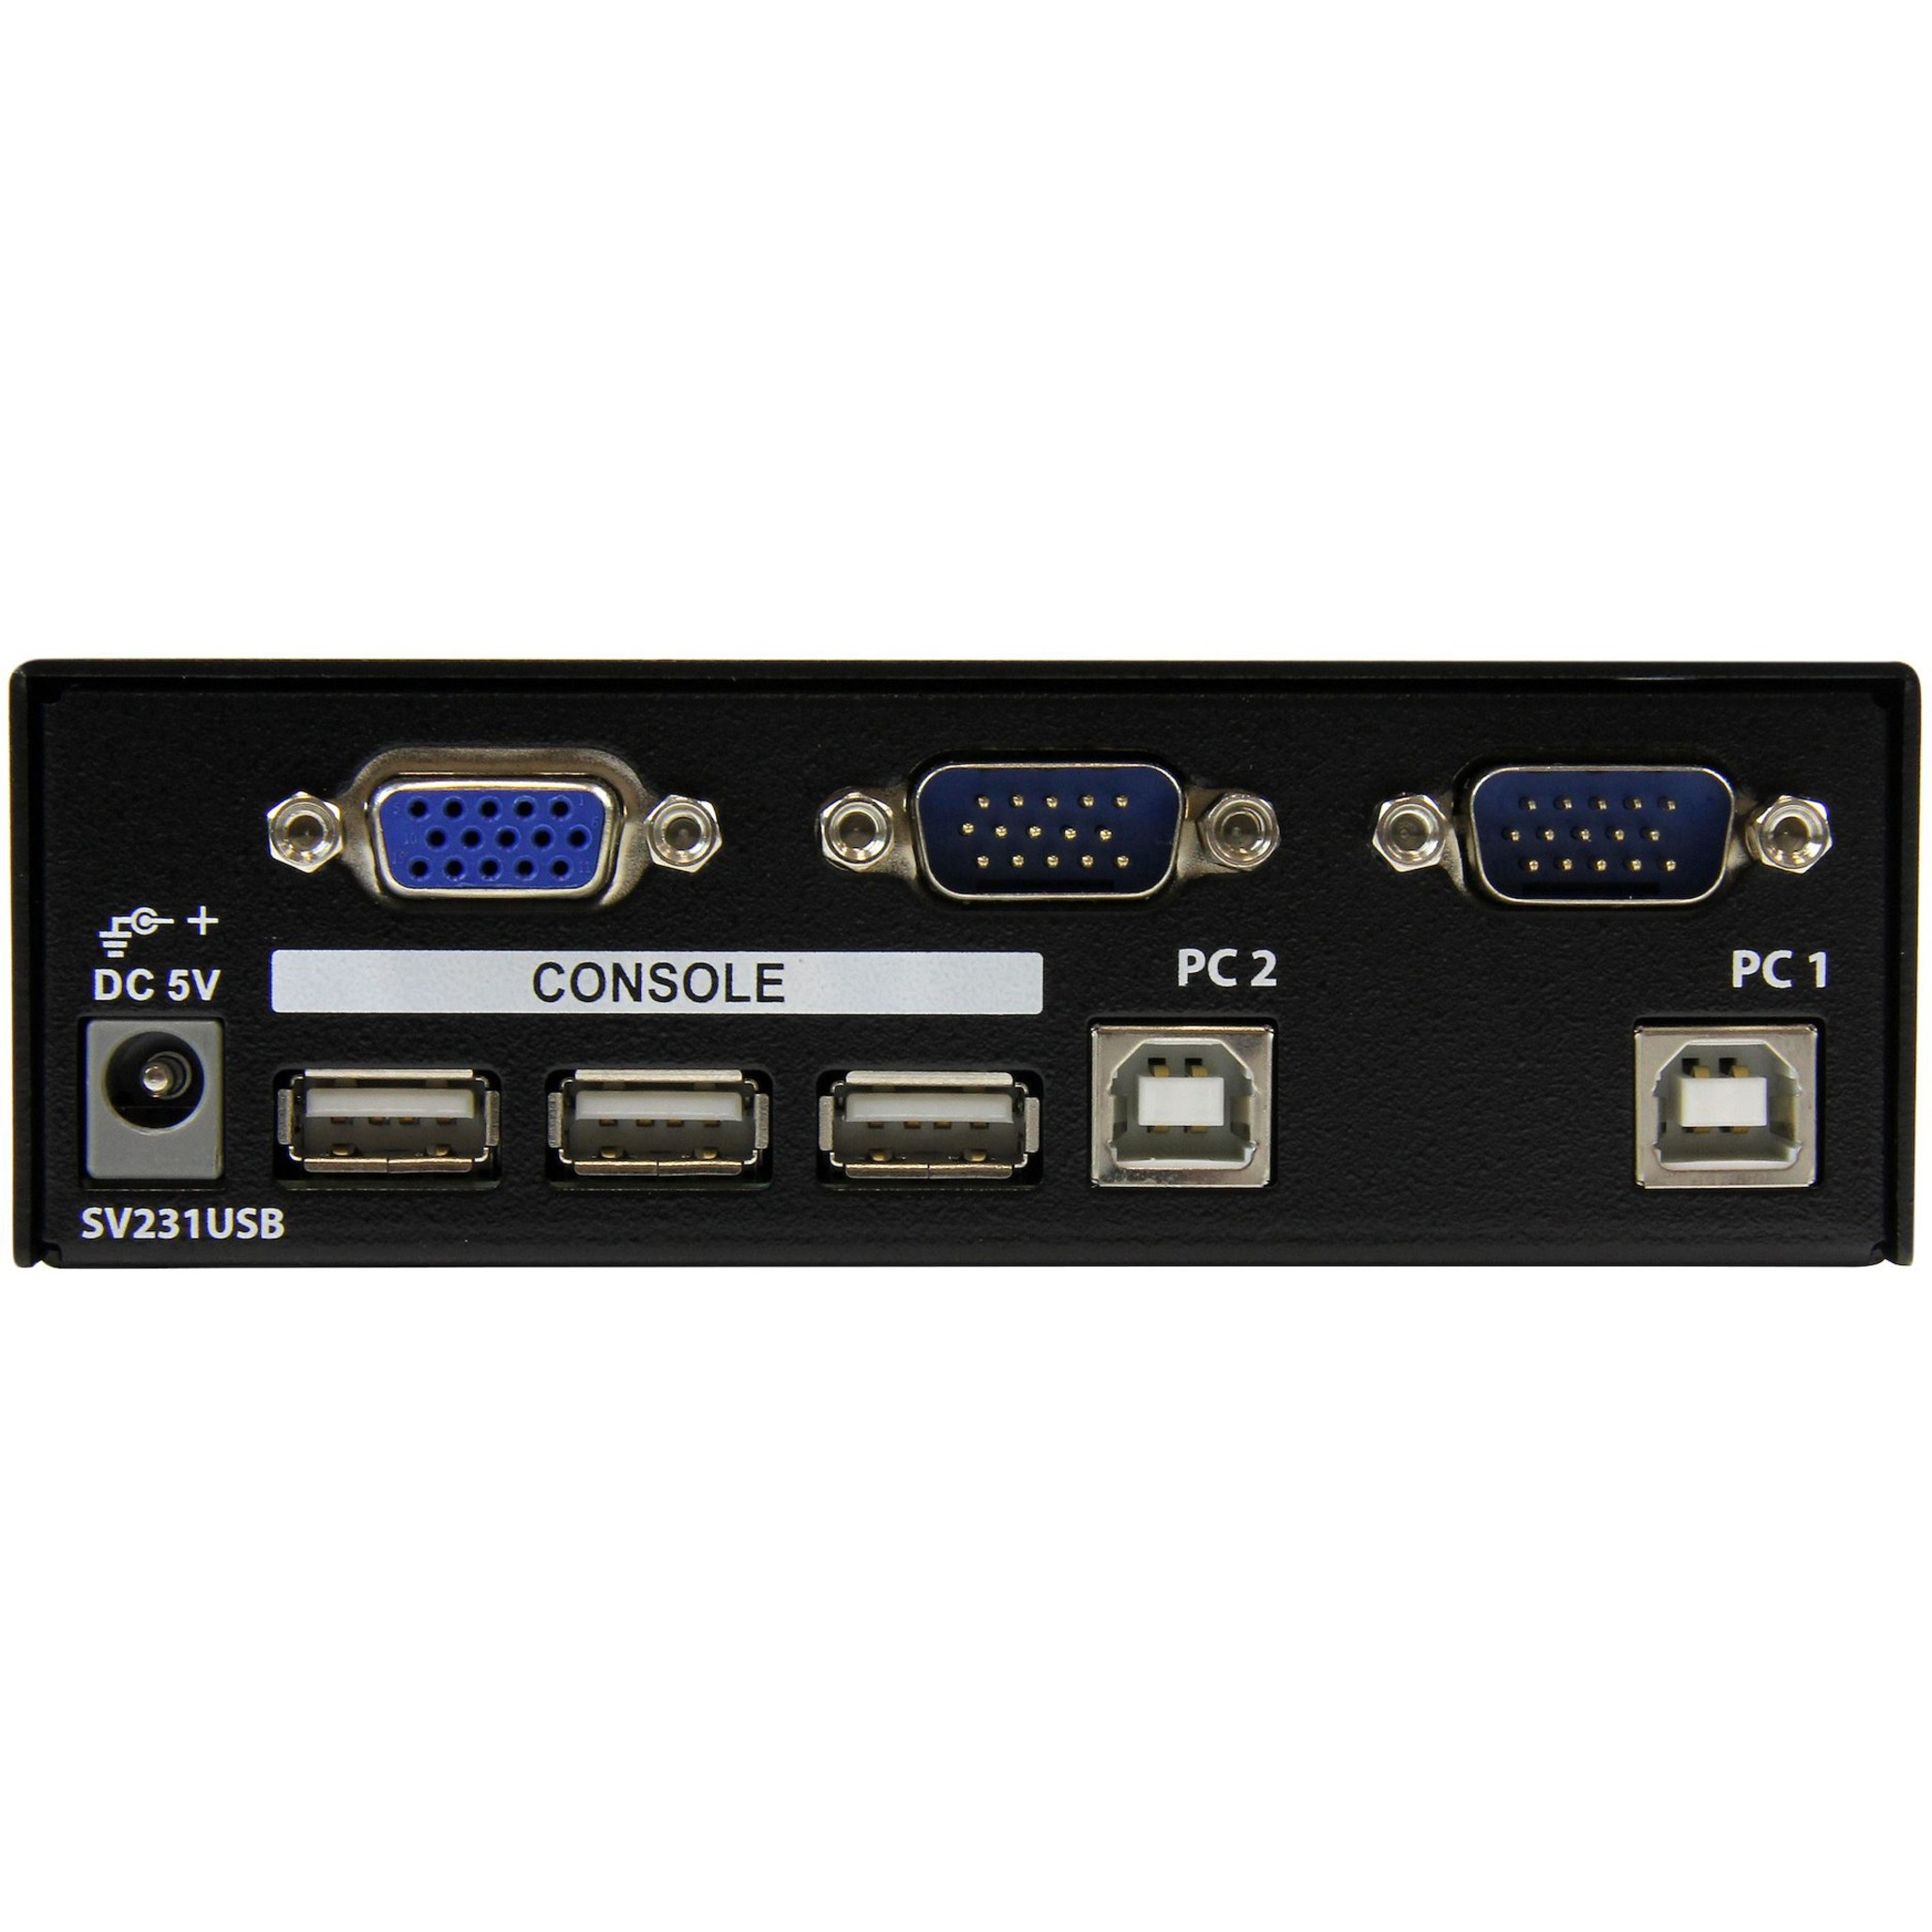 Startech .com 2 Port Professional USB KVM Switch Kit with CablesControl 2 USB VGA based computers with this complete KVM kit including cables… SV231USB